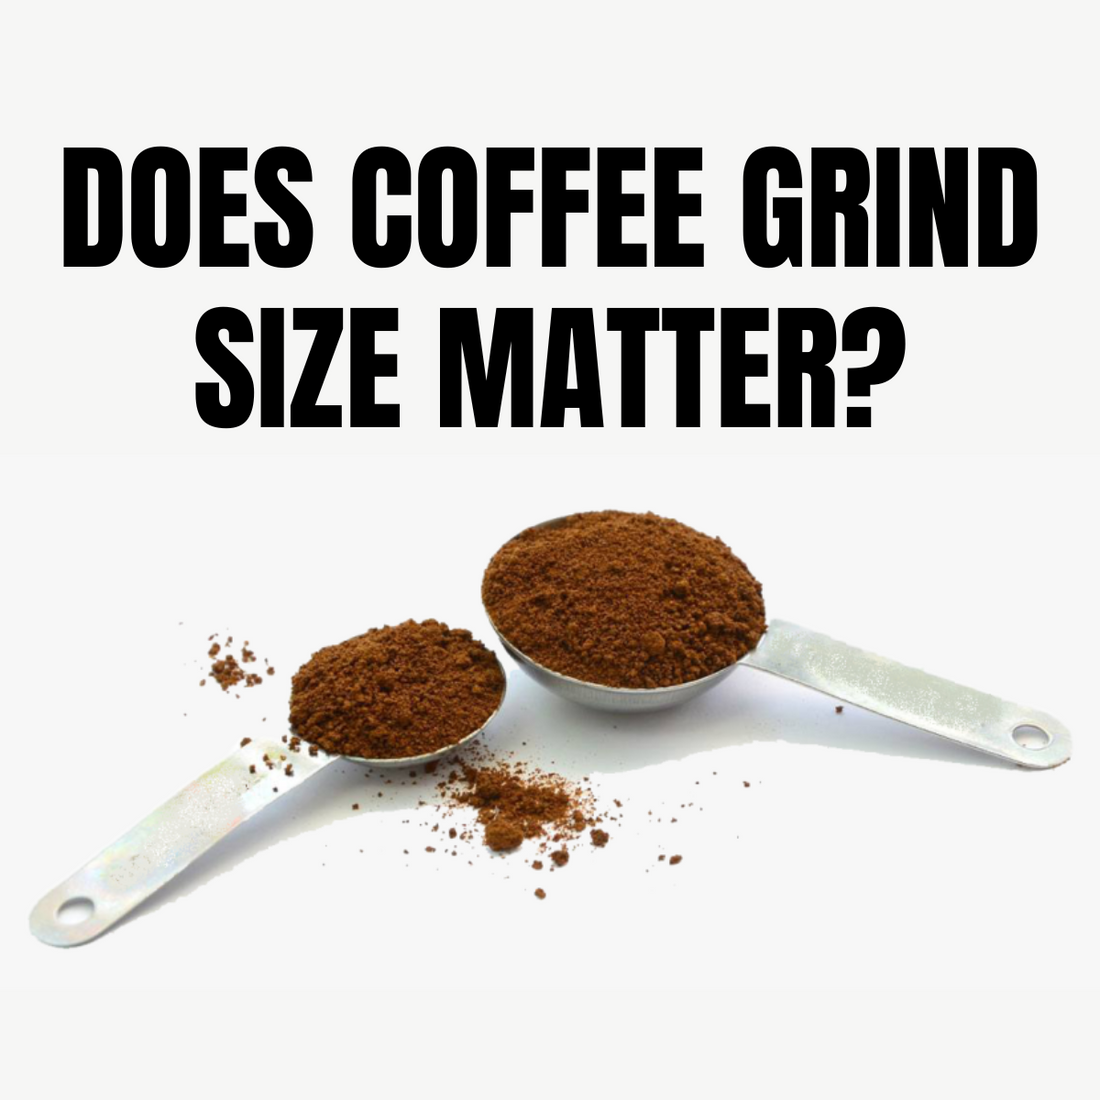 Does Coffee Grind Size Matter?